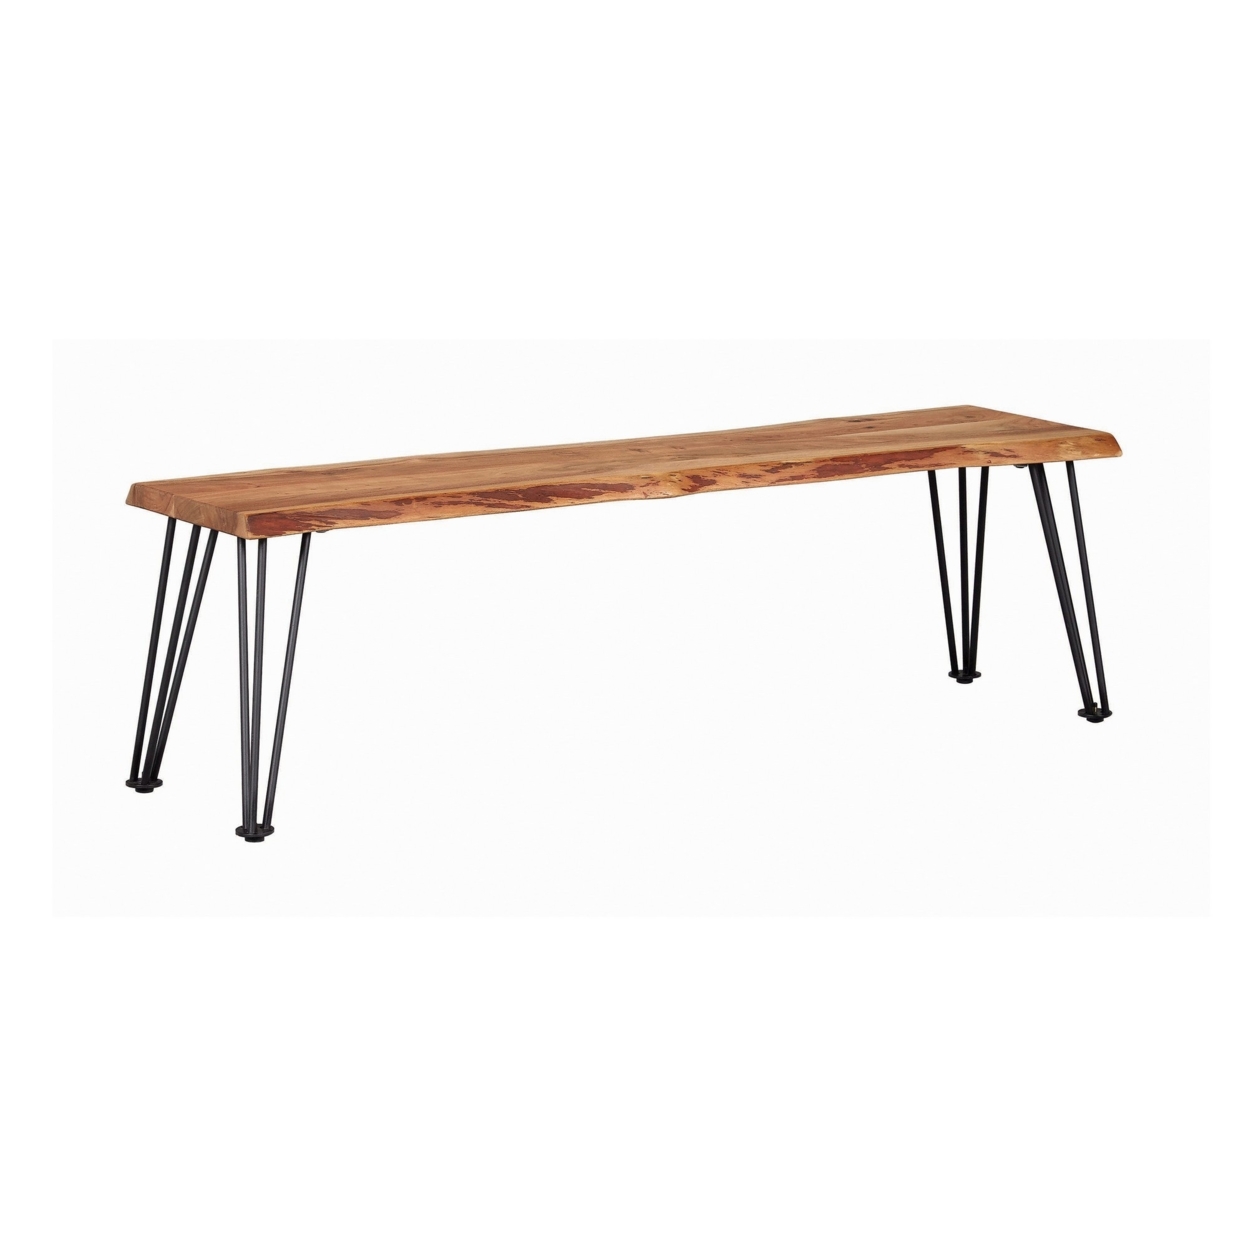 Wooden Dining Bench With Live Edge Details And Metal Legs, Brown- Saltoro Sherpi